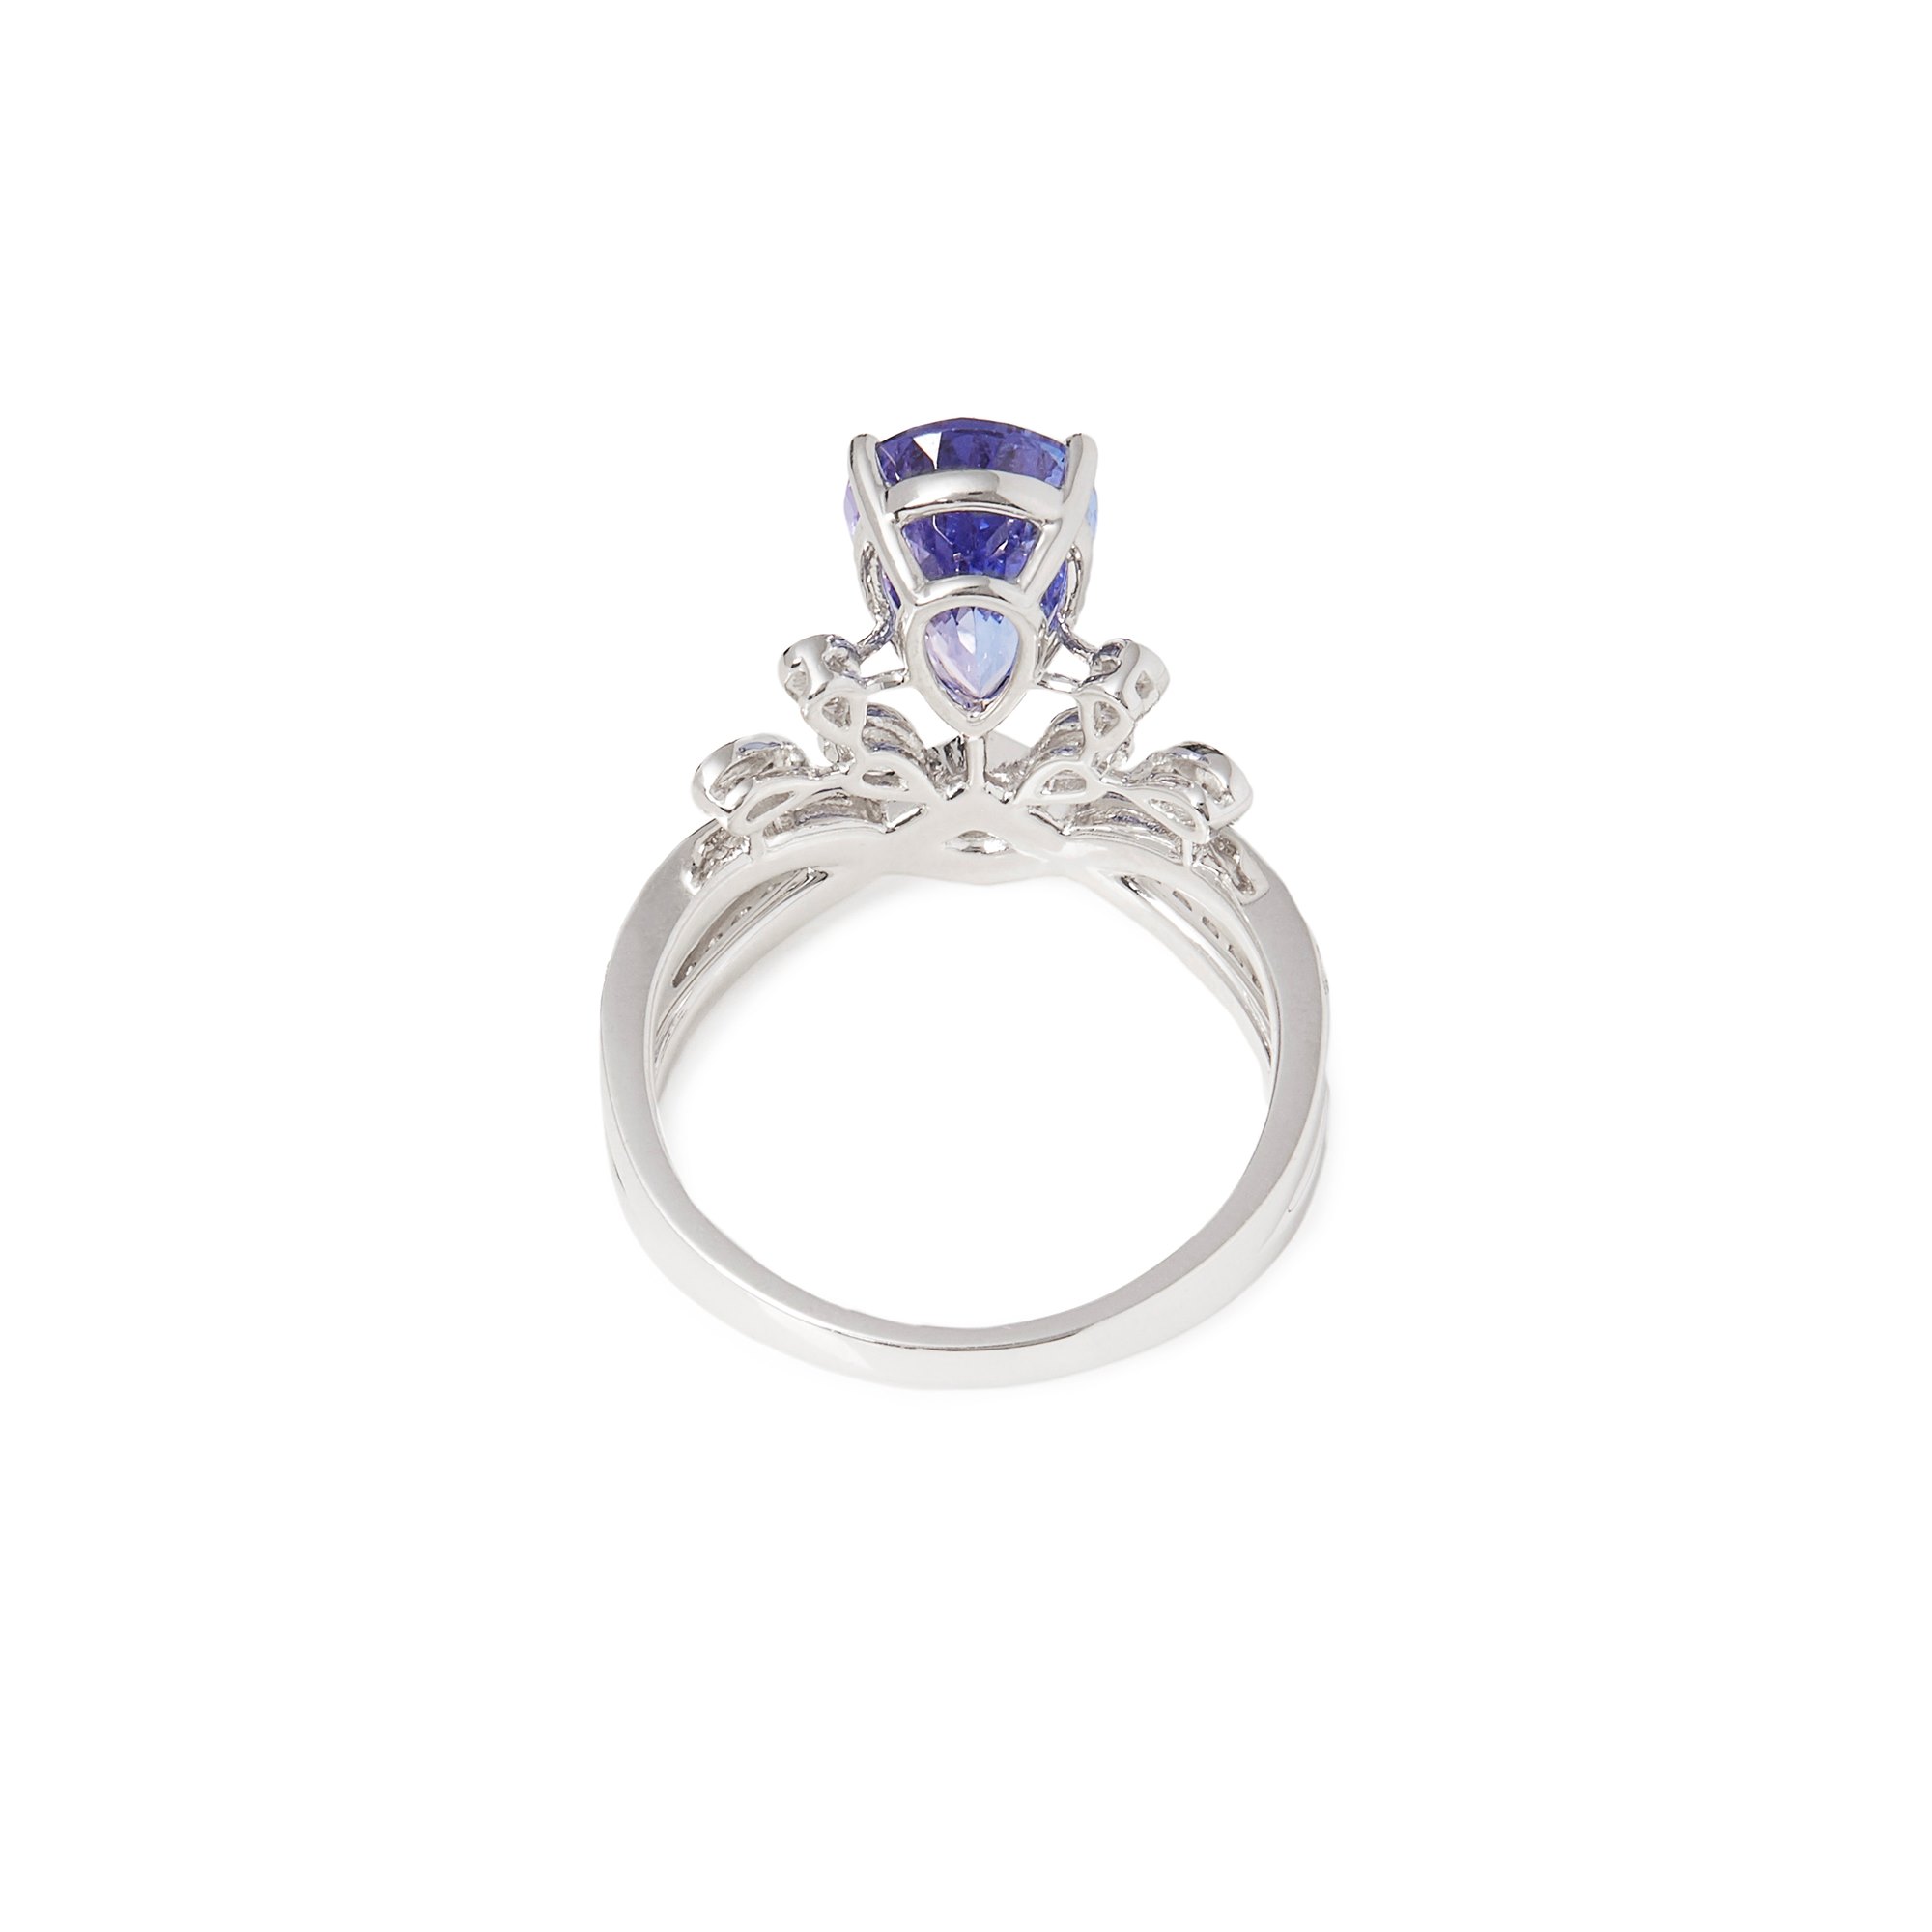 David Jerome Certified 2.7ct Untreated Pear Cut Tanzanite and Diamond 18ct Gold Ring